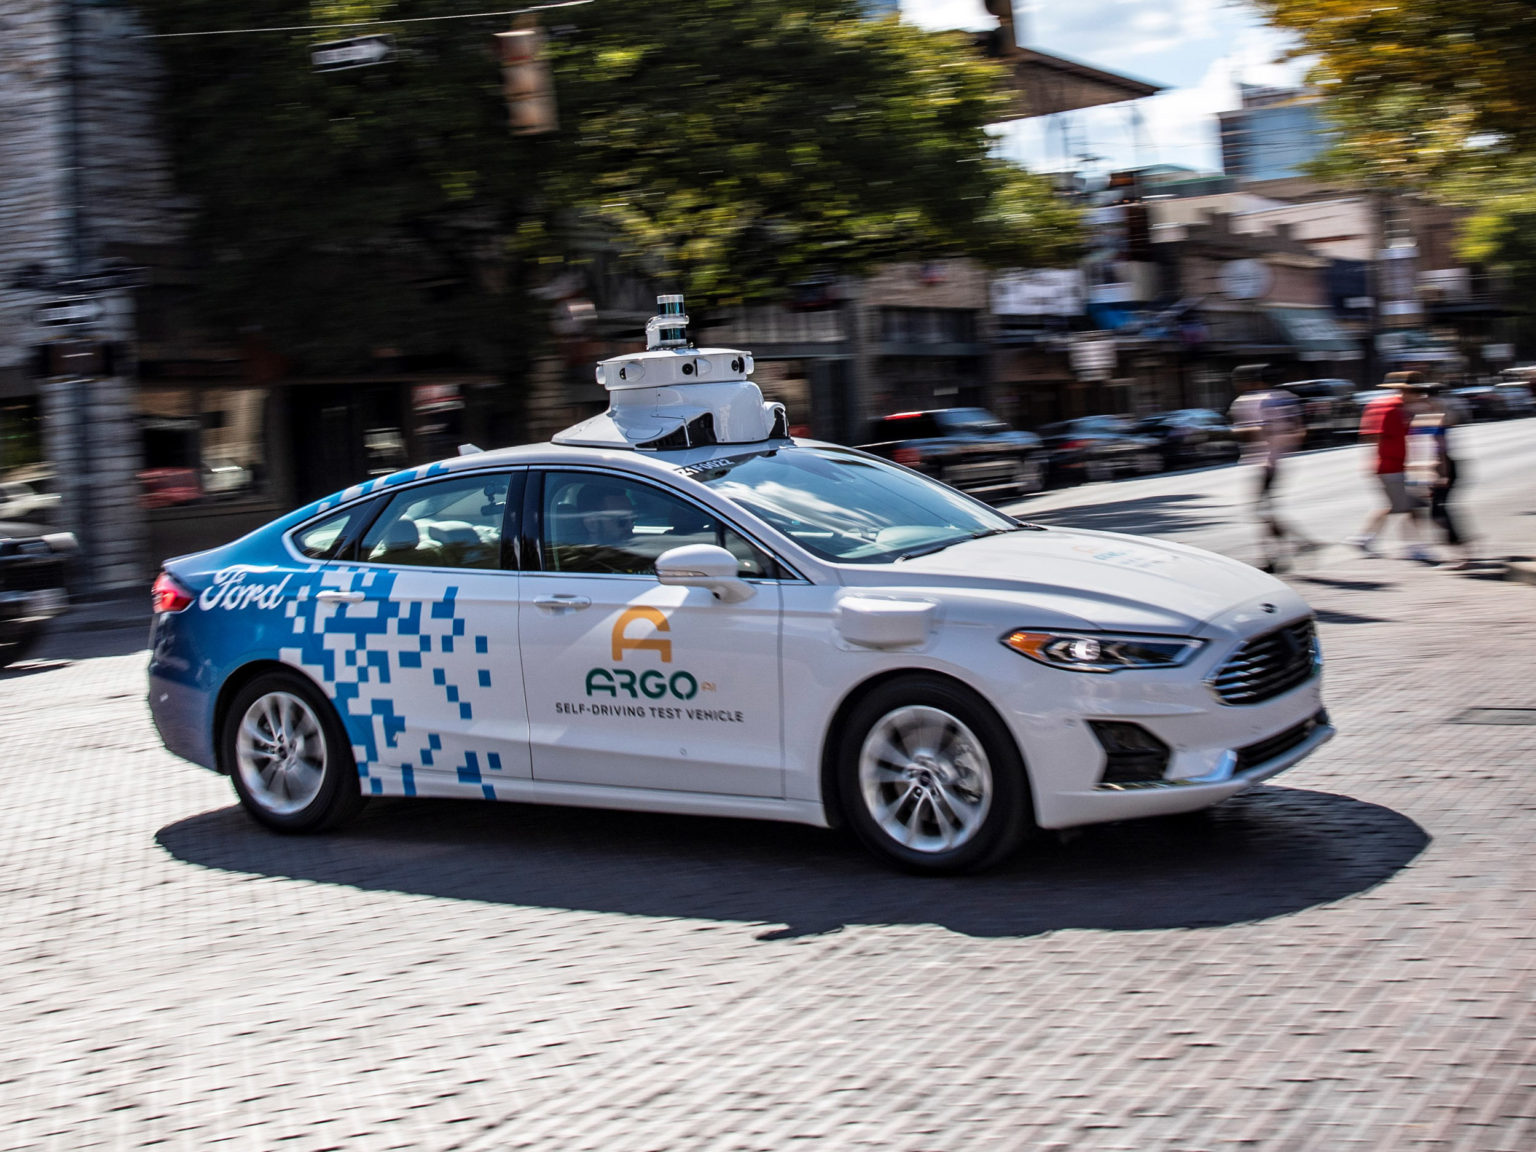 Ford and Volkswagen are spending billions to develop autonomous vehicle technology.